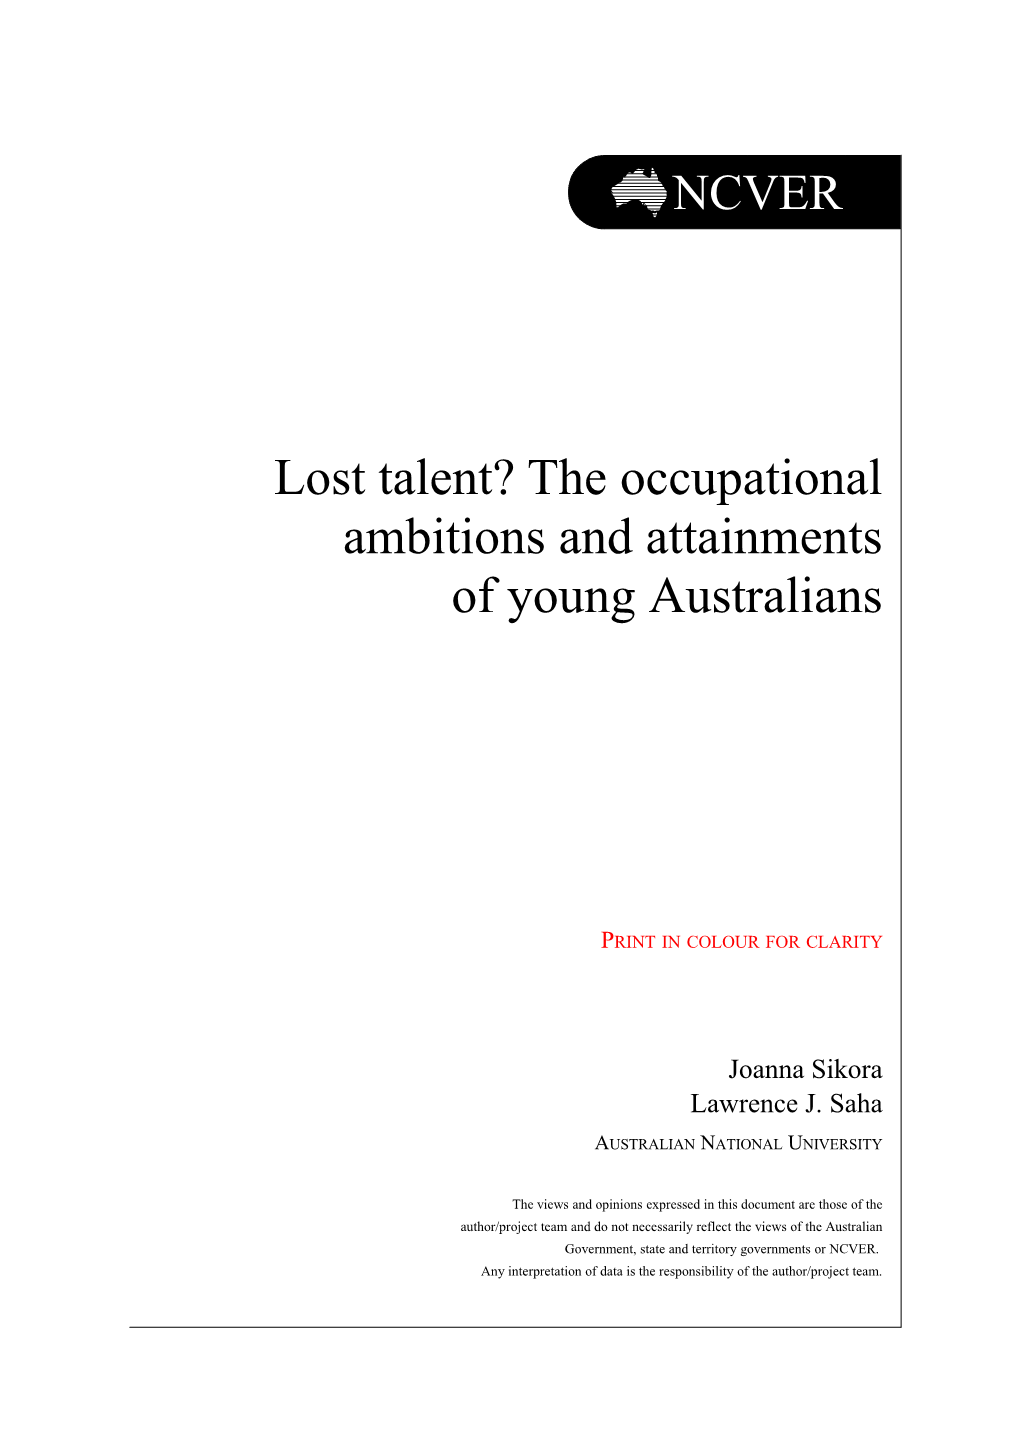 Lost Talent? the Occupational Ambitions and Attainments Ofyoungaustralians